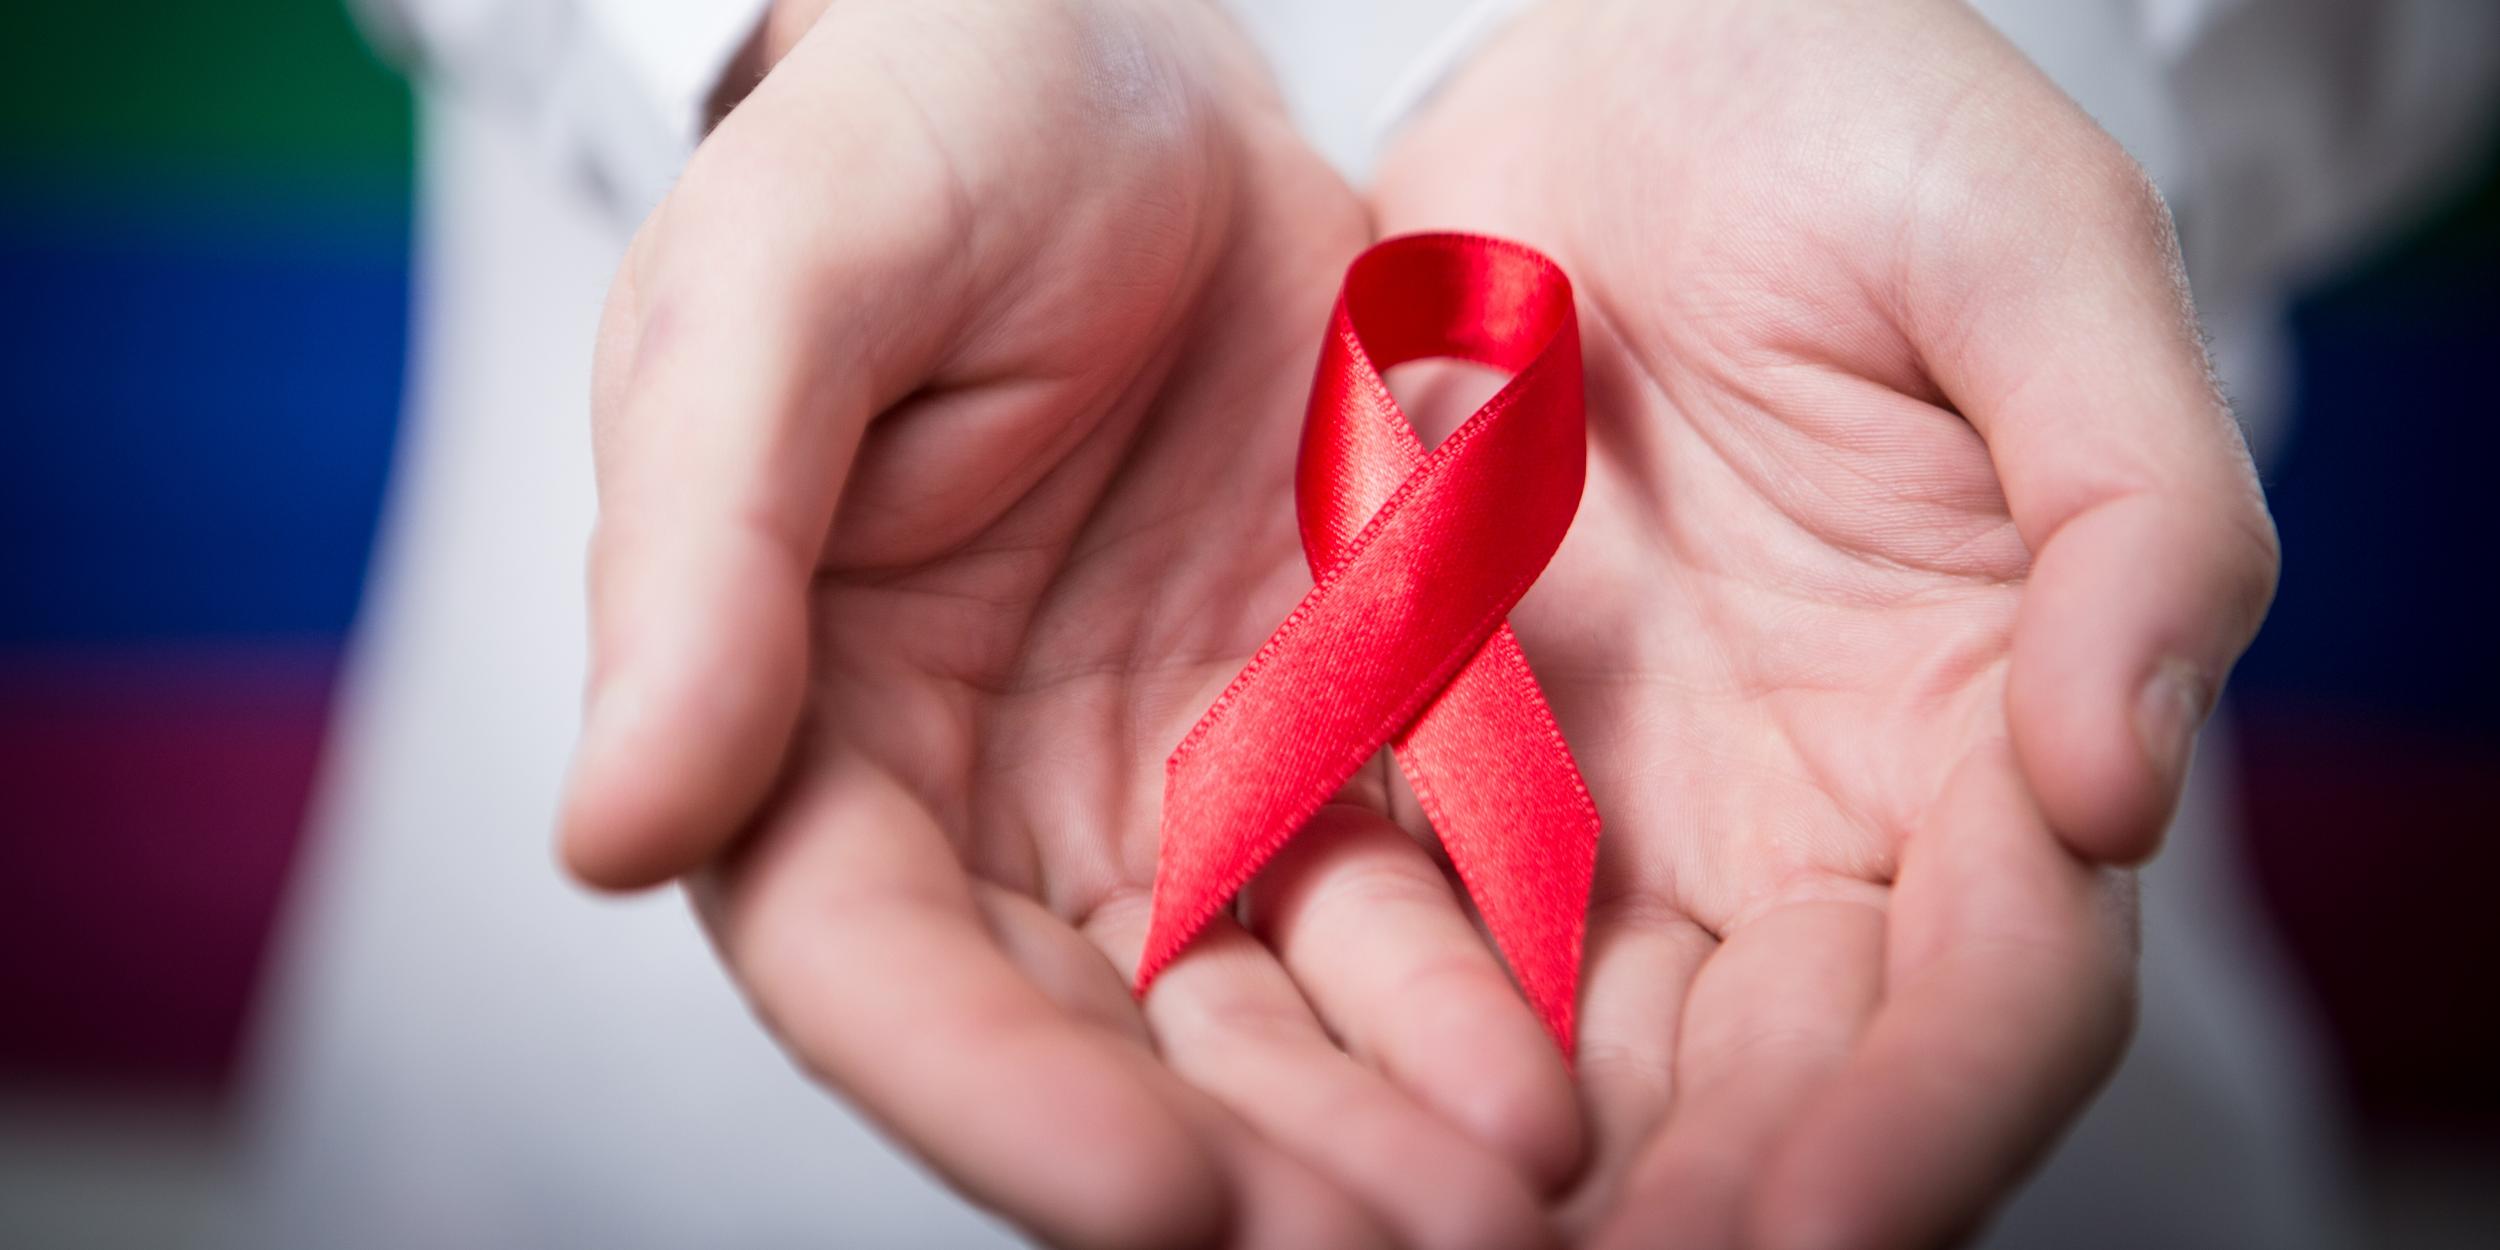 Does HIV finally have a cure?